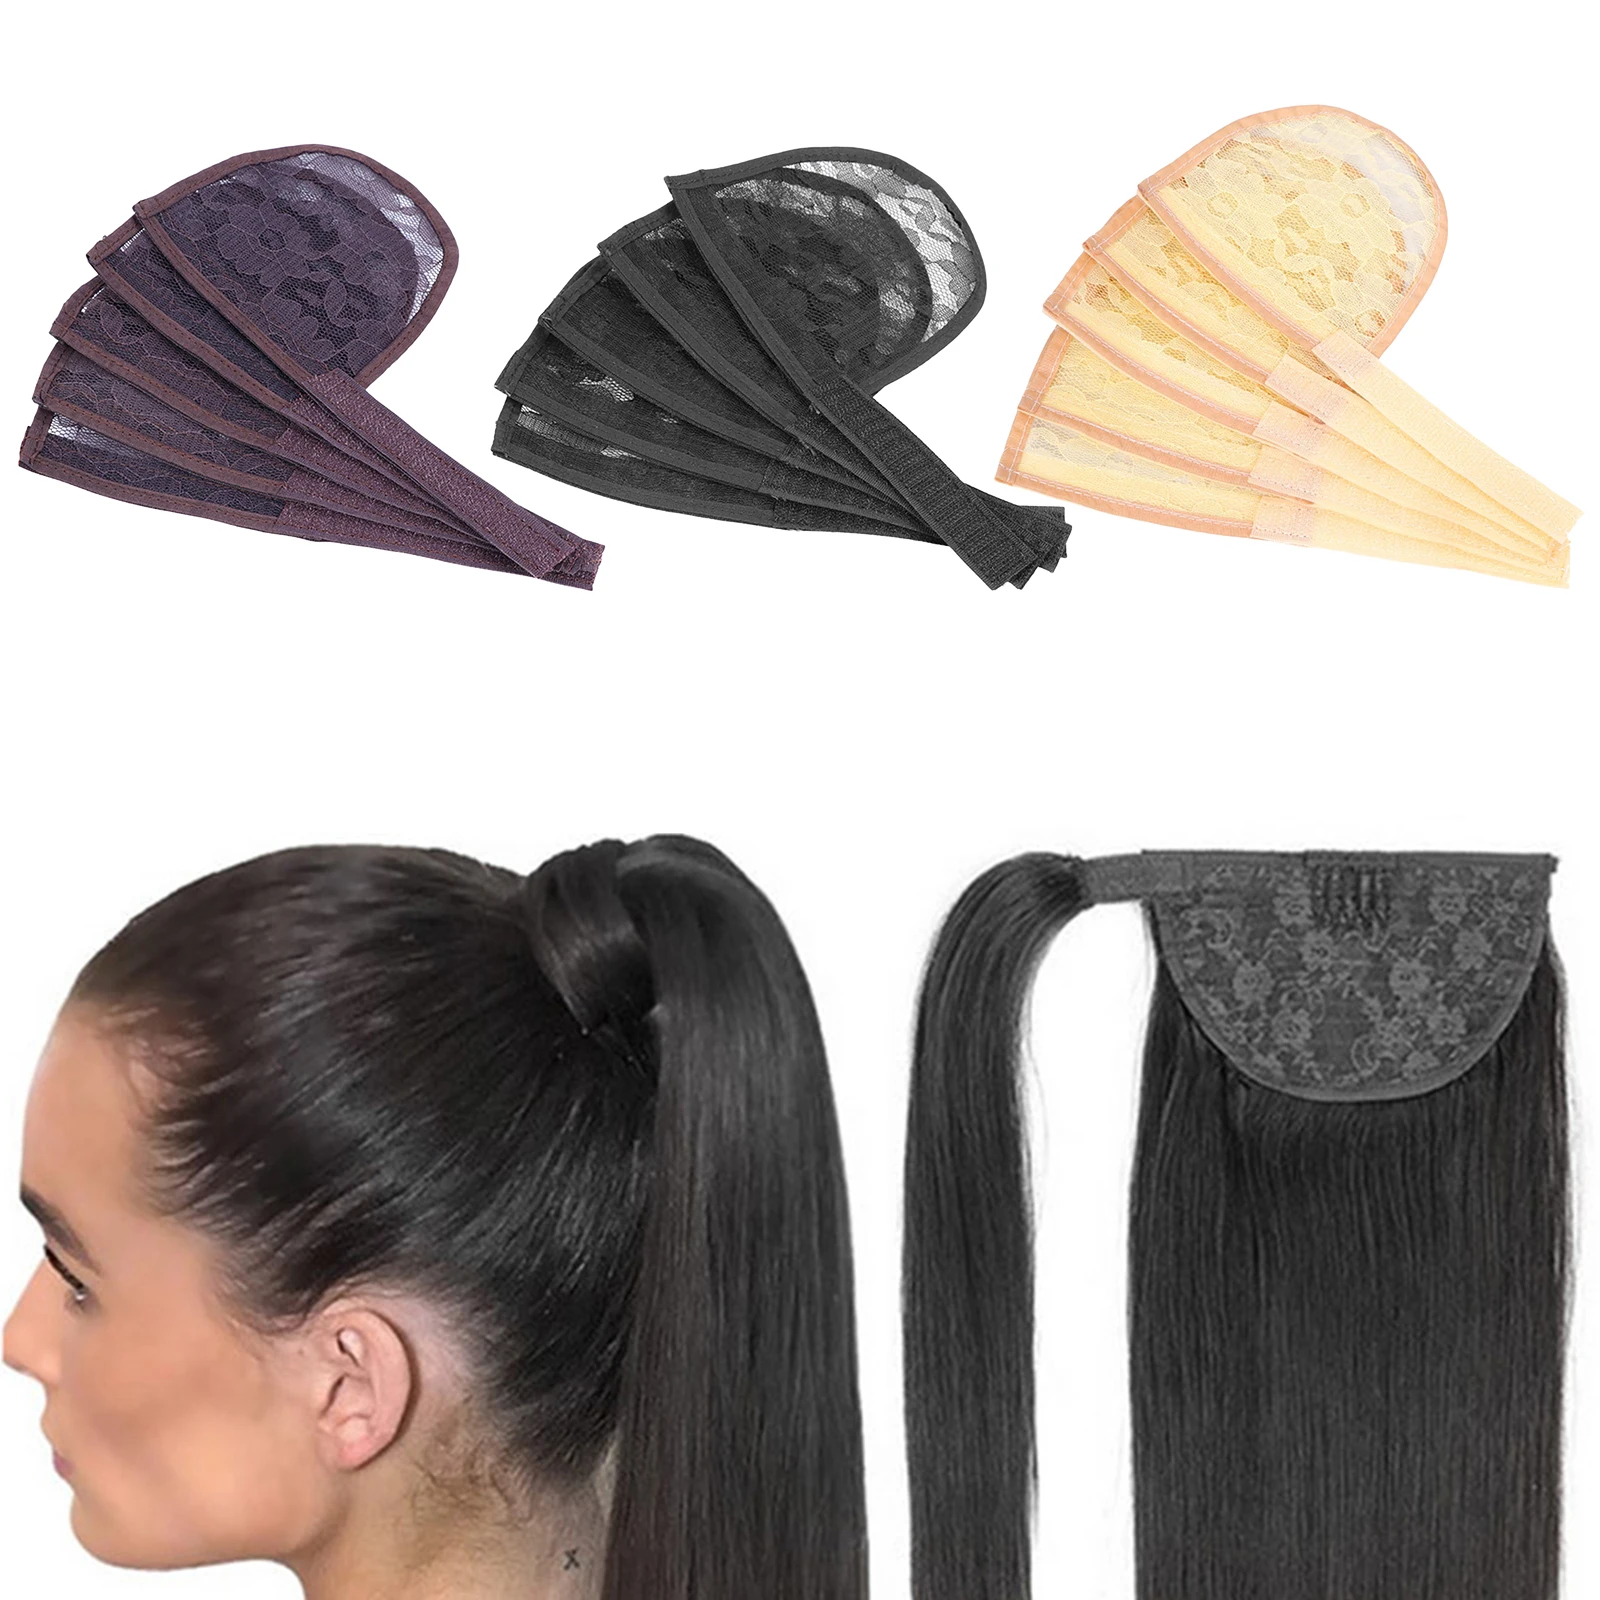 5 Colors Lace Wig Clips Steel Tooth Polyester Durable Cloth Wig